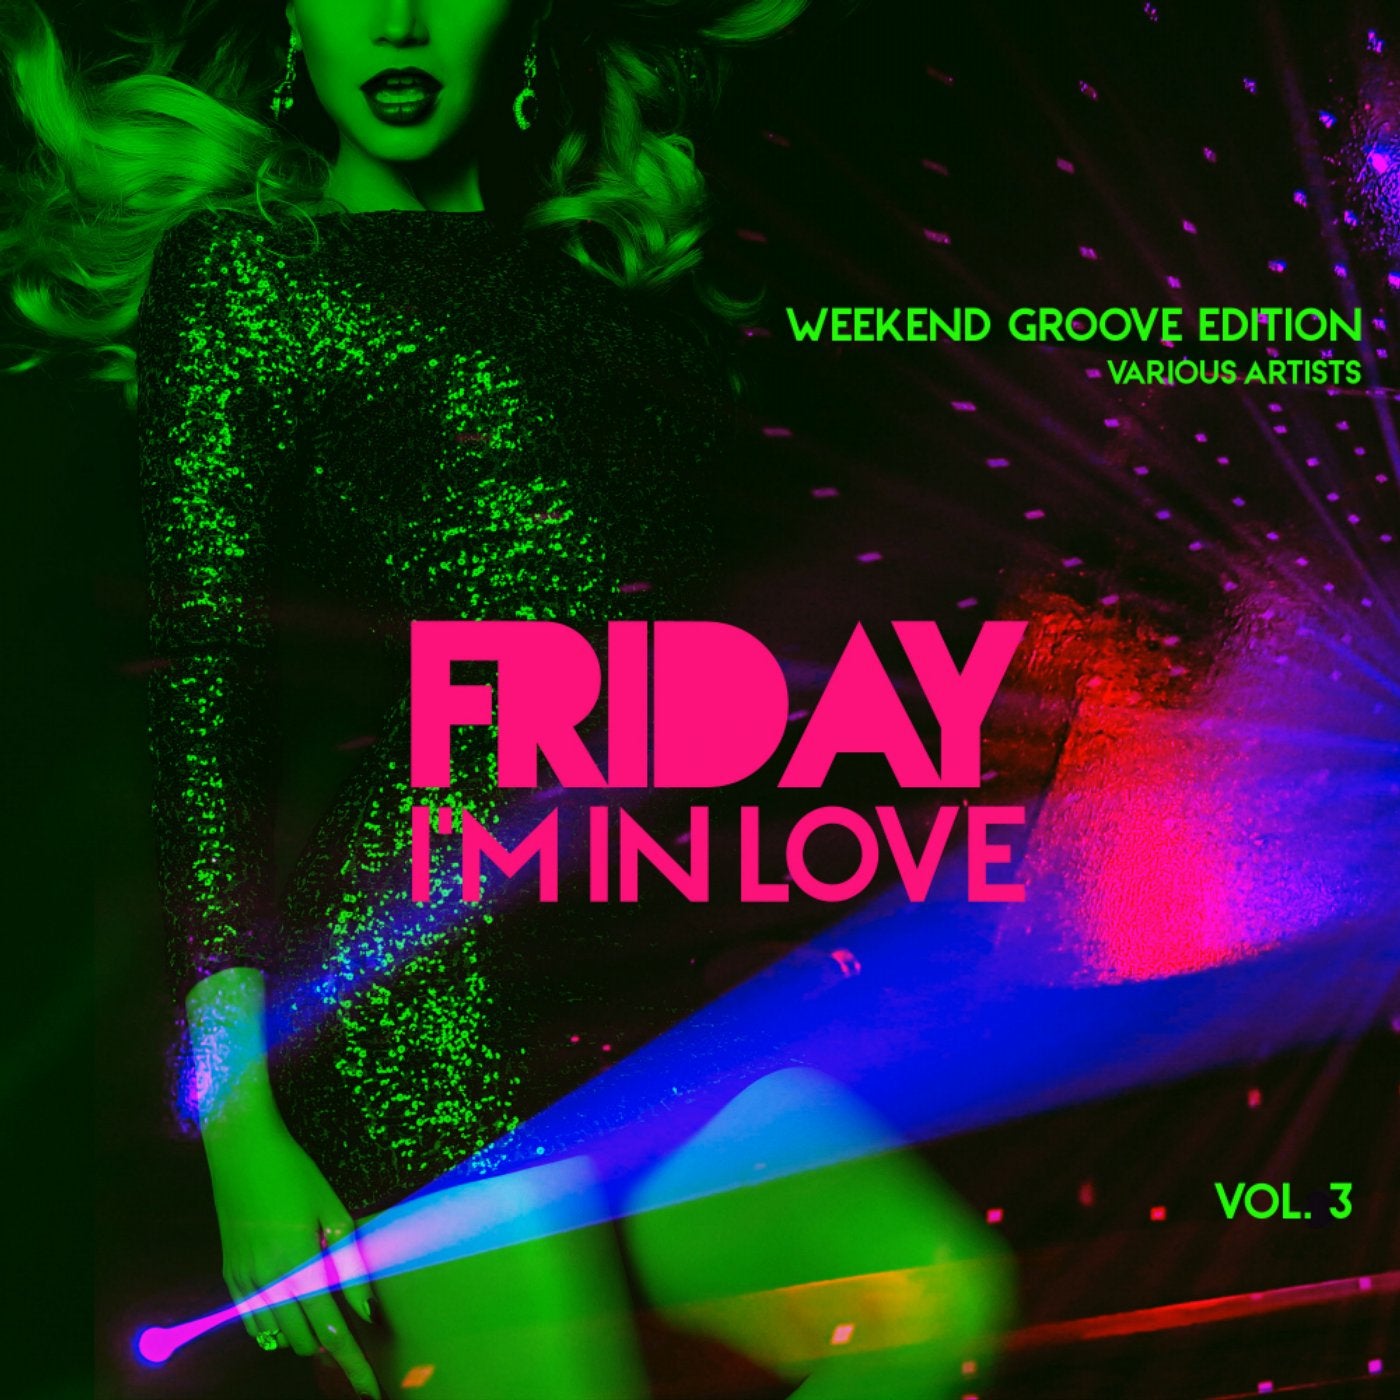 Friday I'm In Love (Weekend Groove Edition), Vol. 3